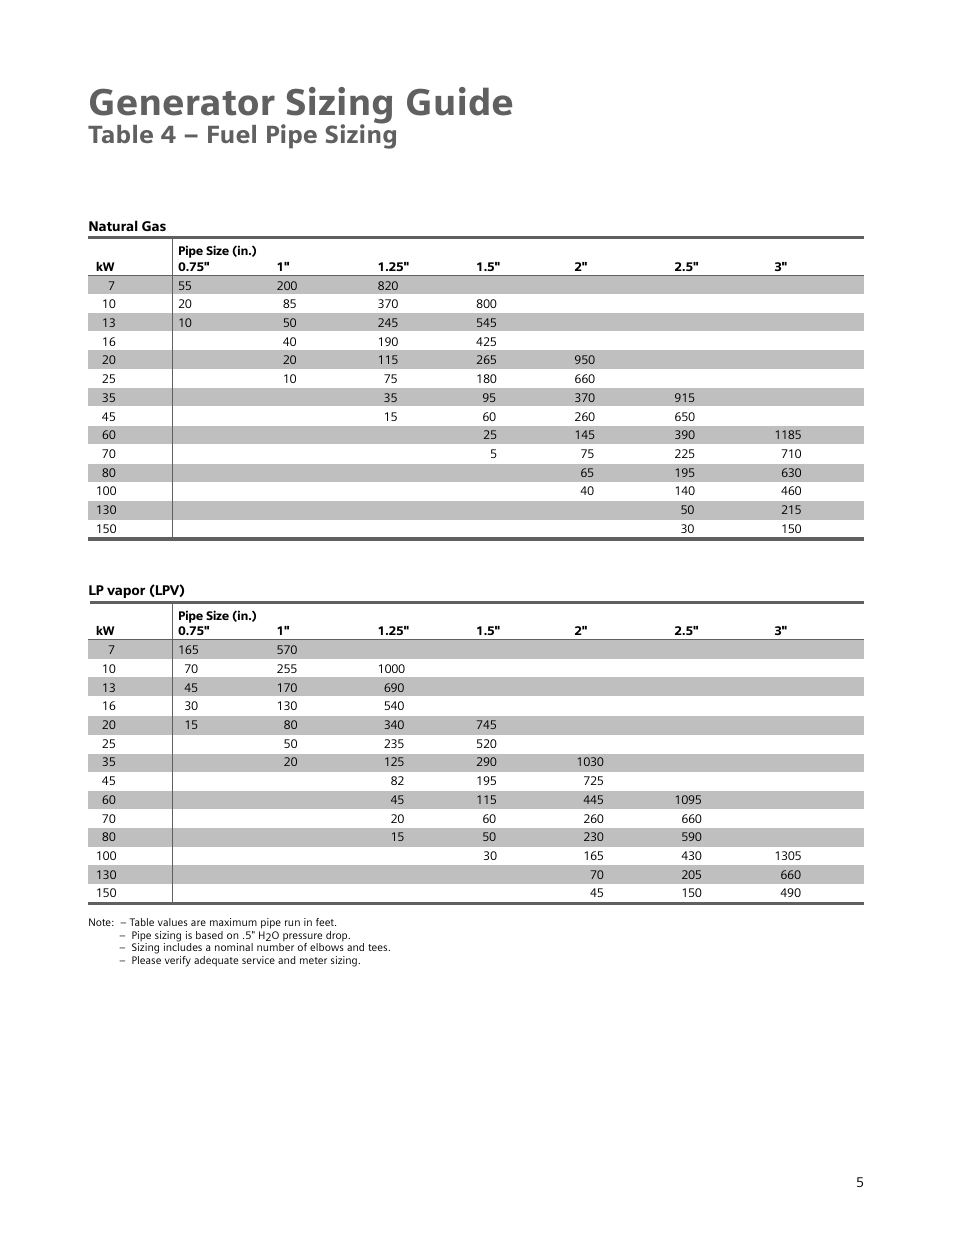 Generator sizing guide, Table 4 – fuel pipe sizing | Siemens Standby ...